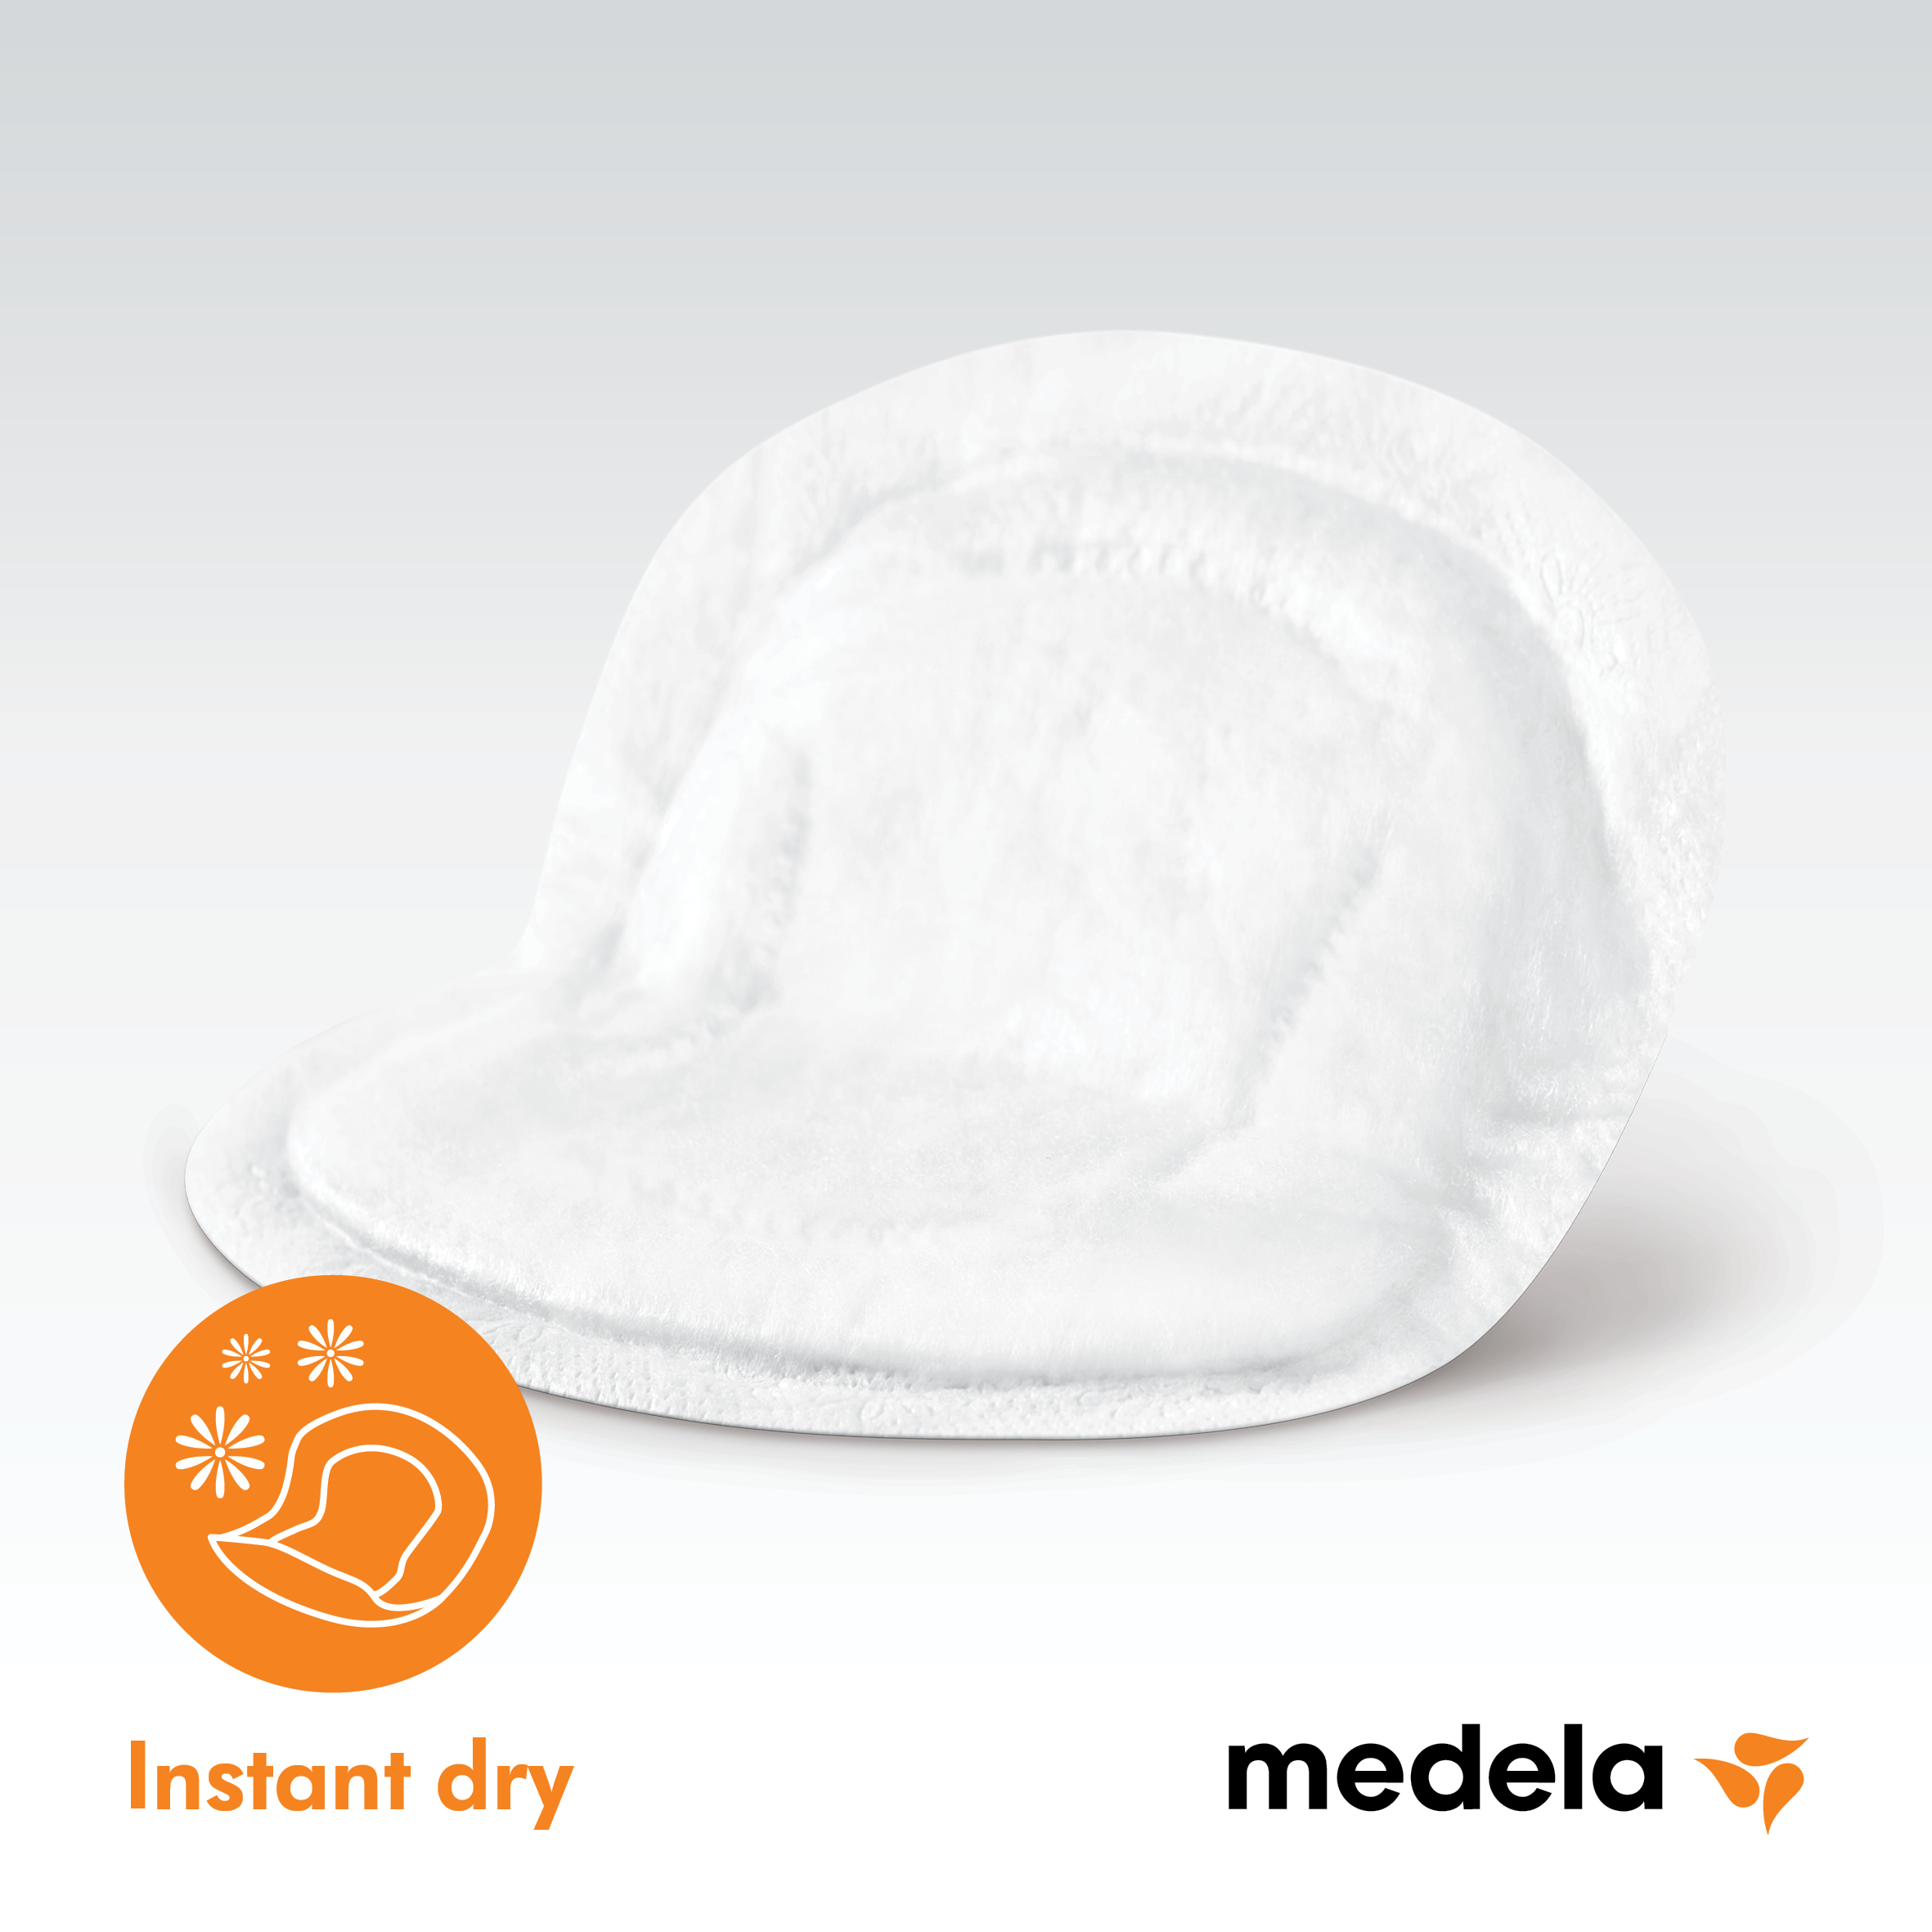 MEDELA SAFE AND DRY ULTRA THIN DISPOSABLE NURSING PADS 30's